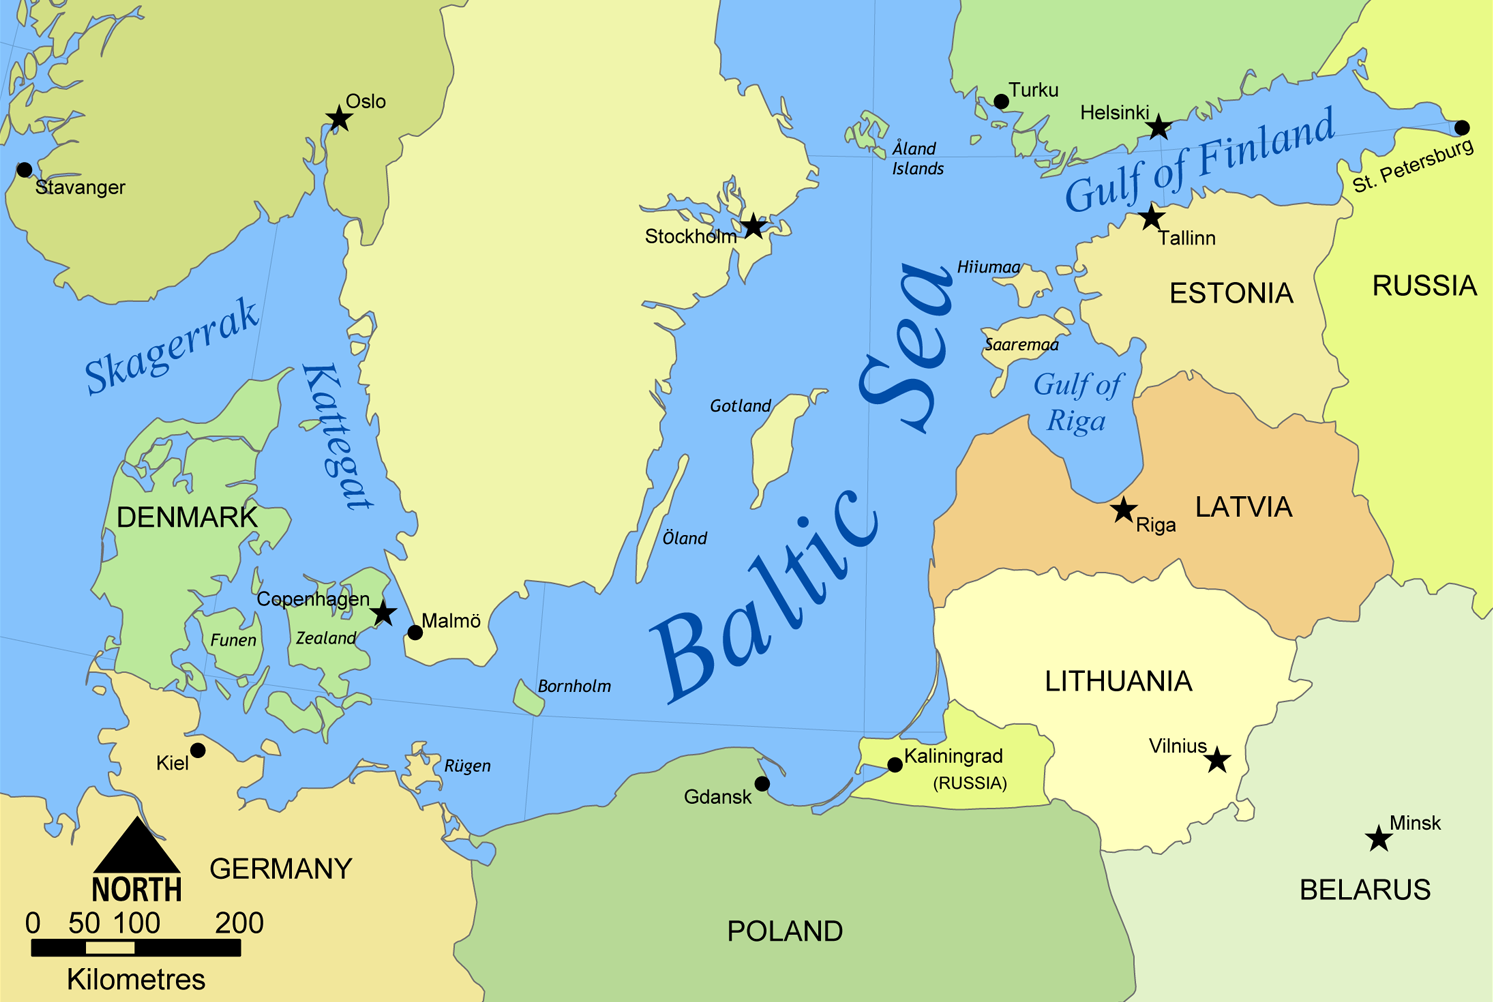 Germany Returns to the Baltic Sea